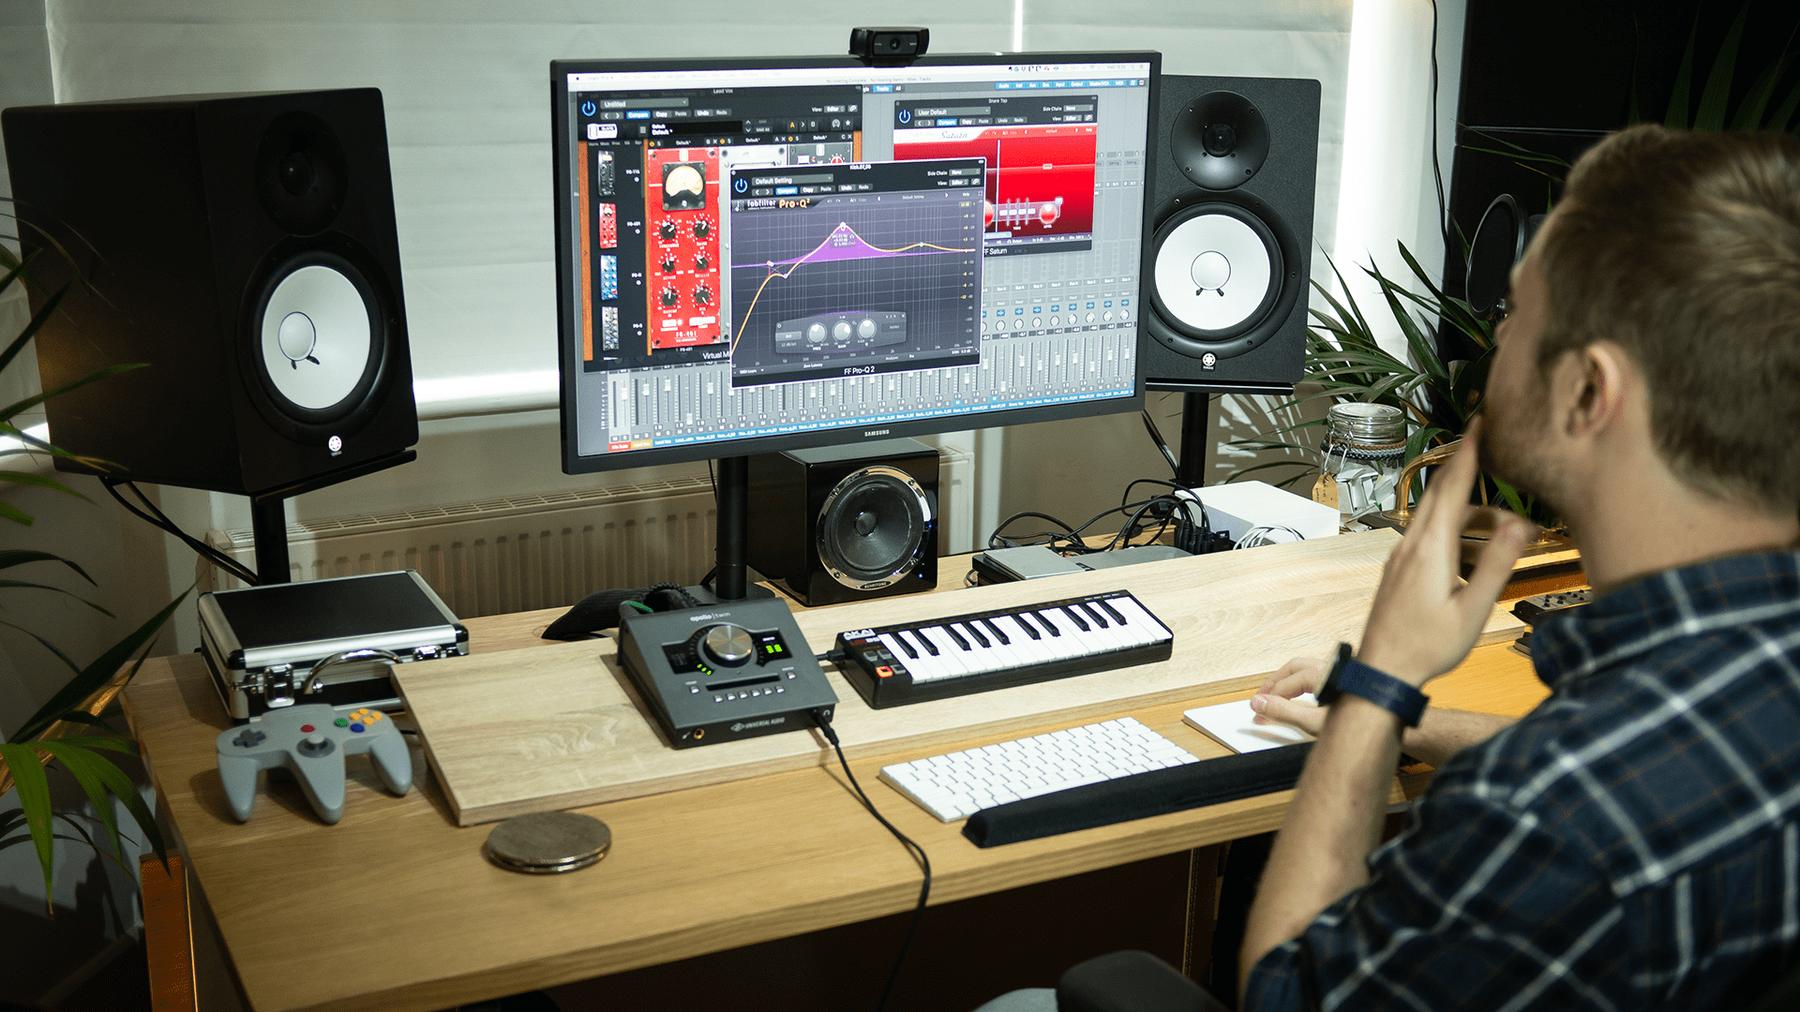 Top 10 Music Production Laptops for Under $500